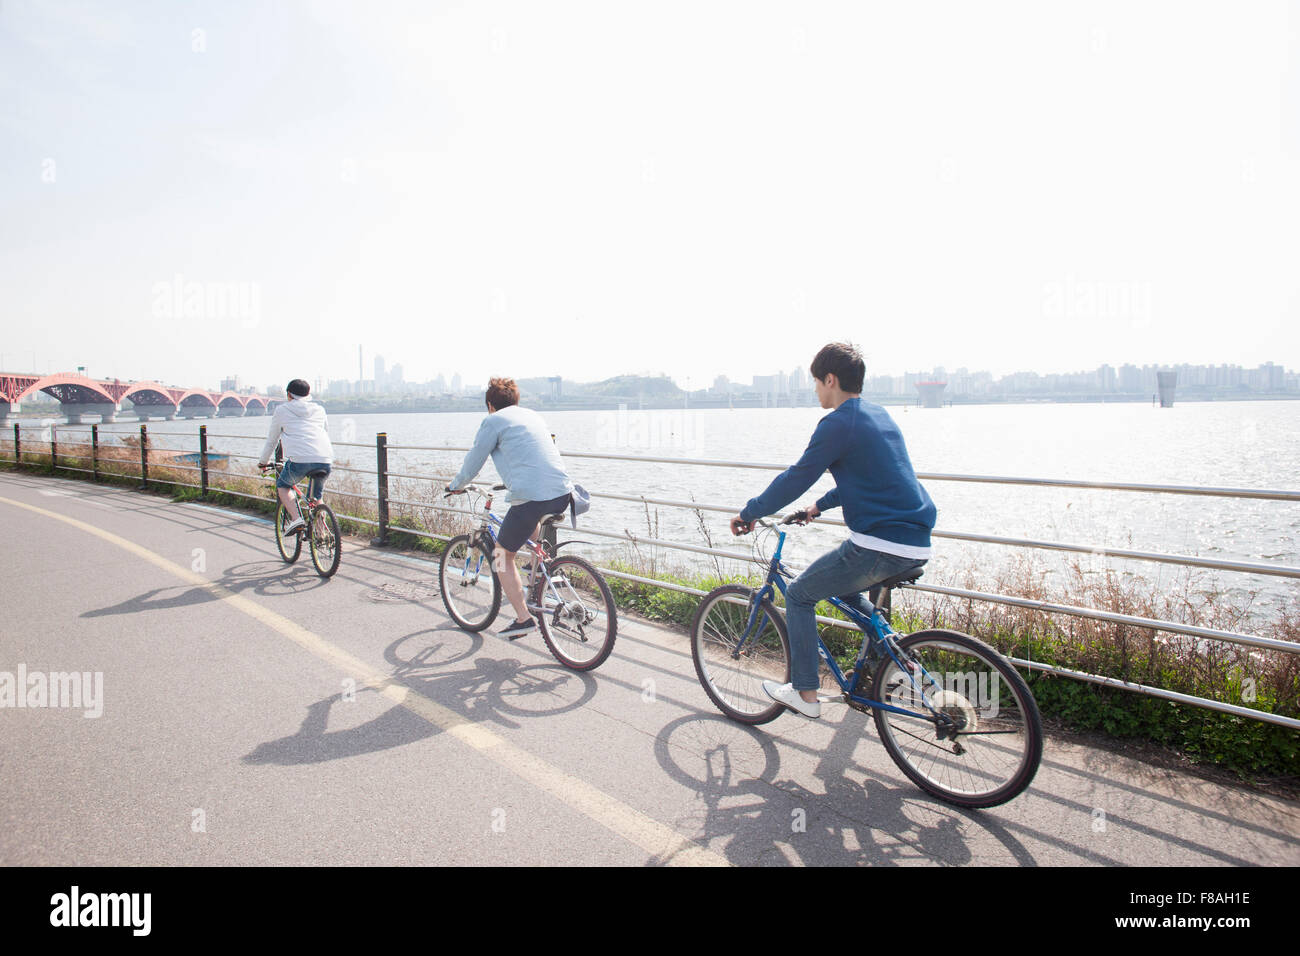 Three young men riding a bike in a row Stock Photo